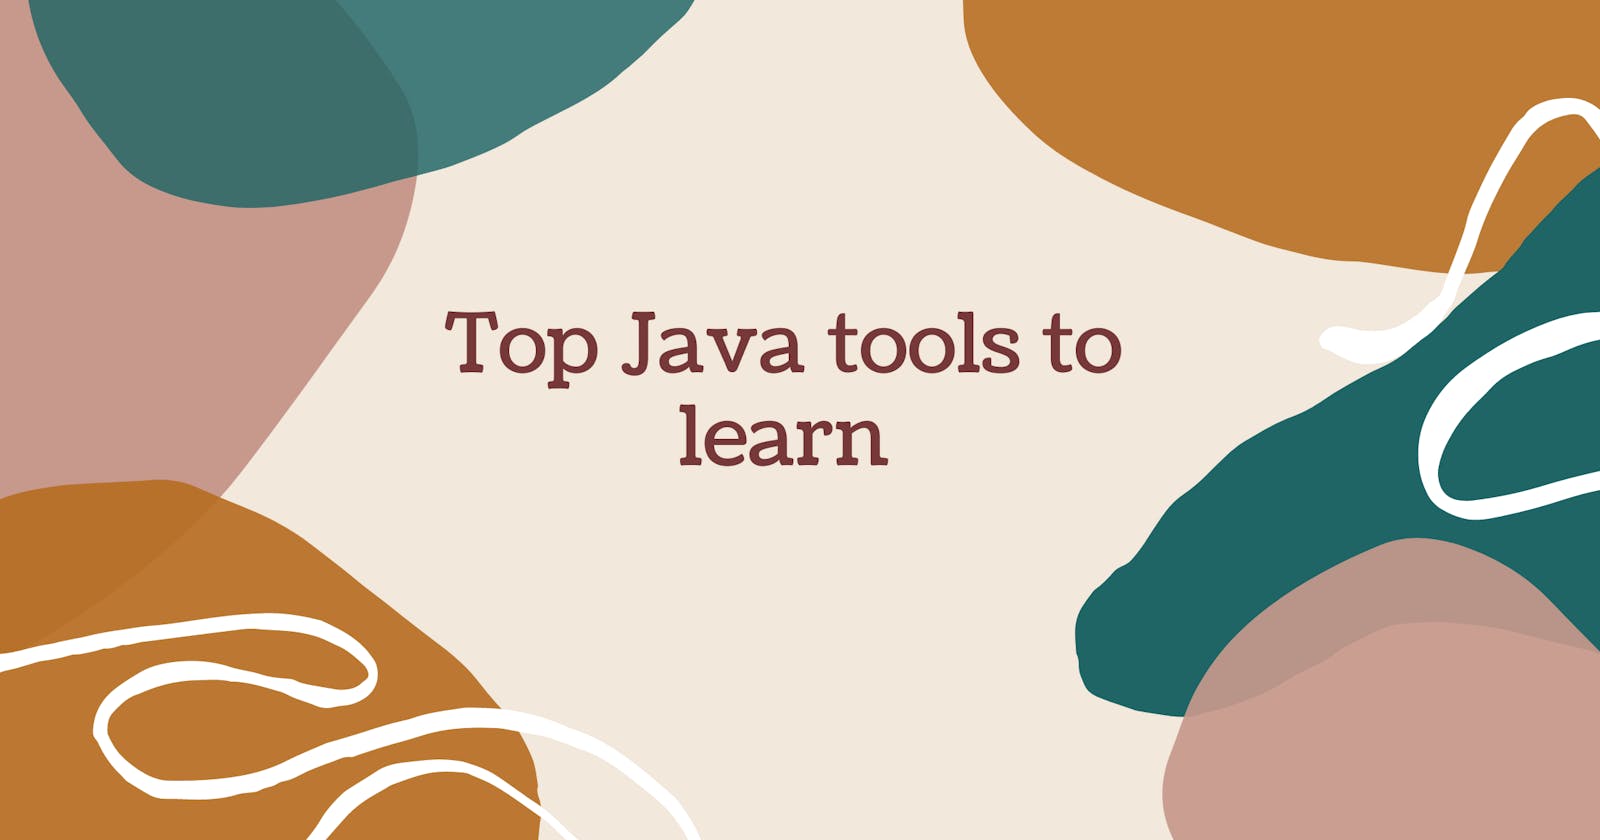 Top tools to learn to become a complete Java developer